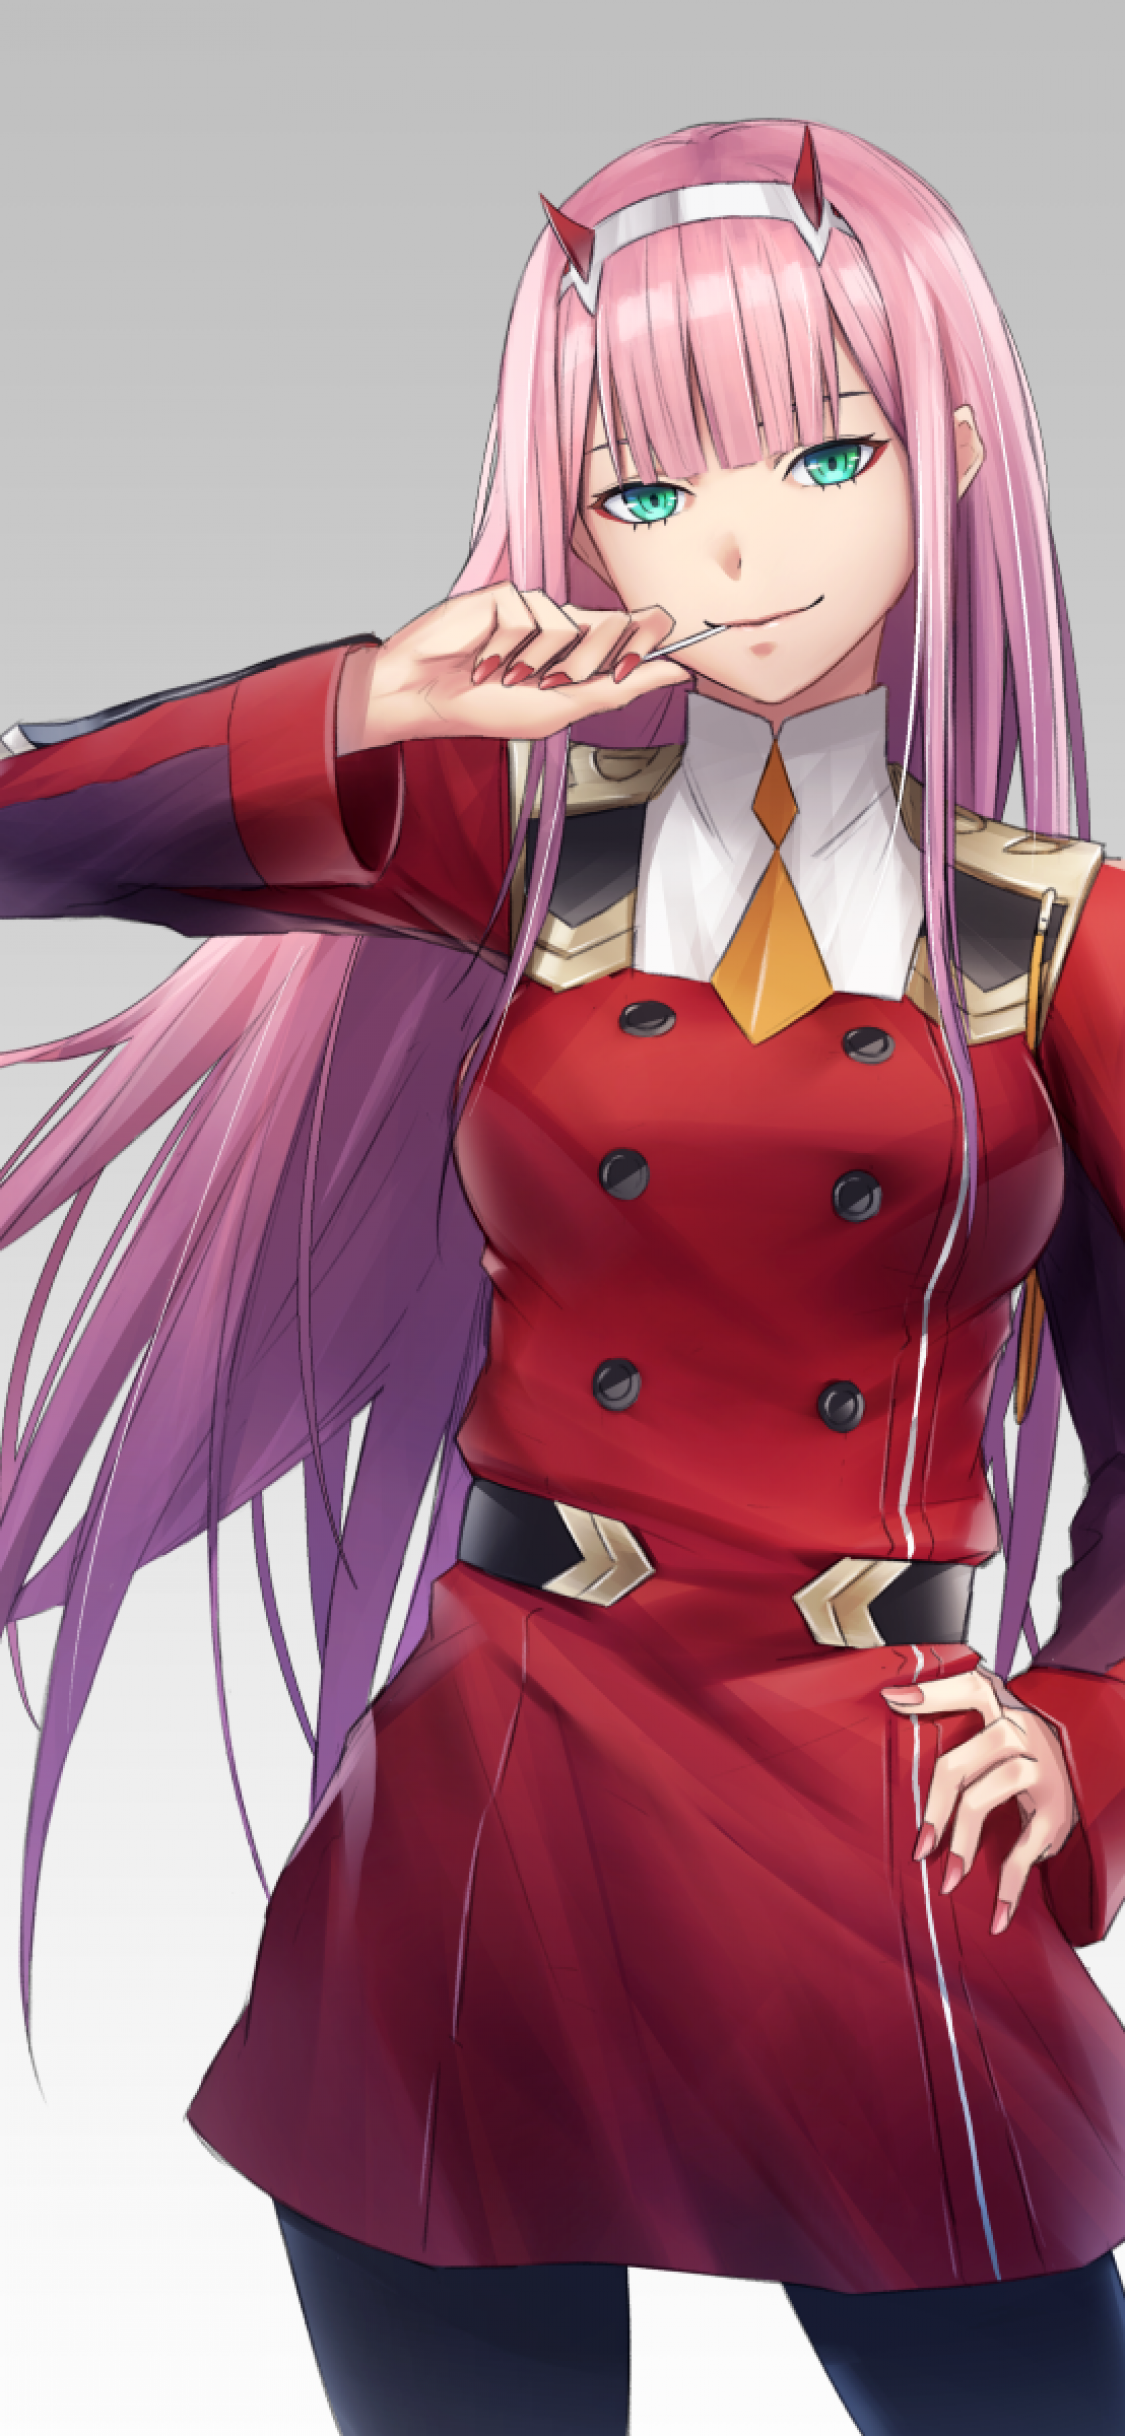 Download 1125x2436 Zero Two, Pink Hair, Darling In The Franxx, Smiling, Green Eyes Wallpaper for iPhone X